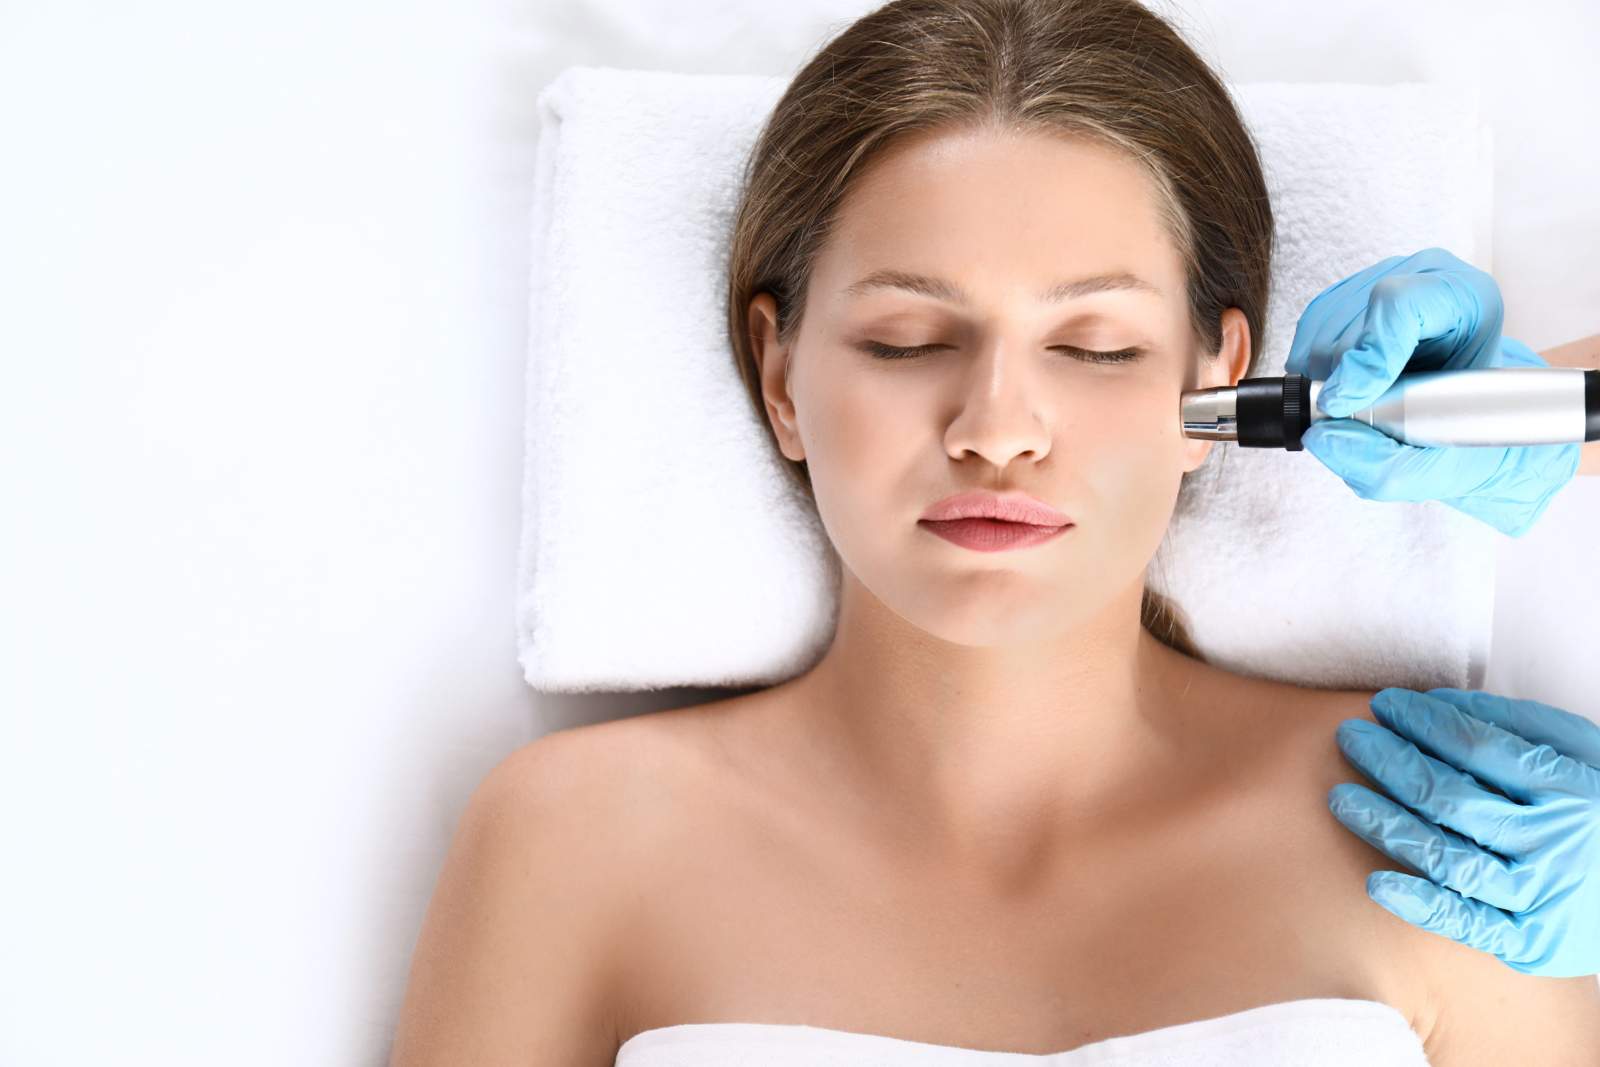 Thermage or Ultherapy: Which is More Effective?